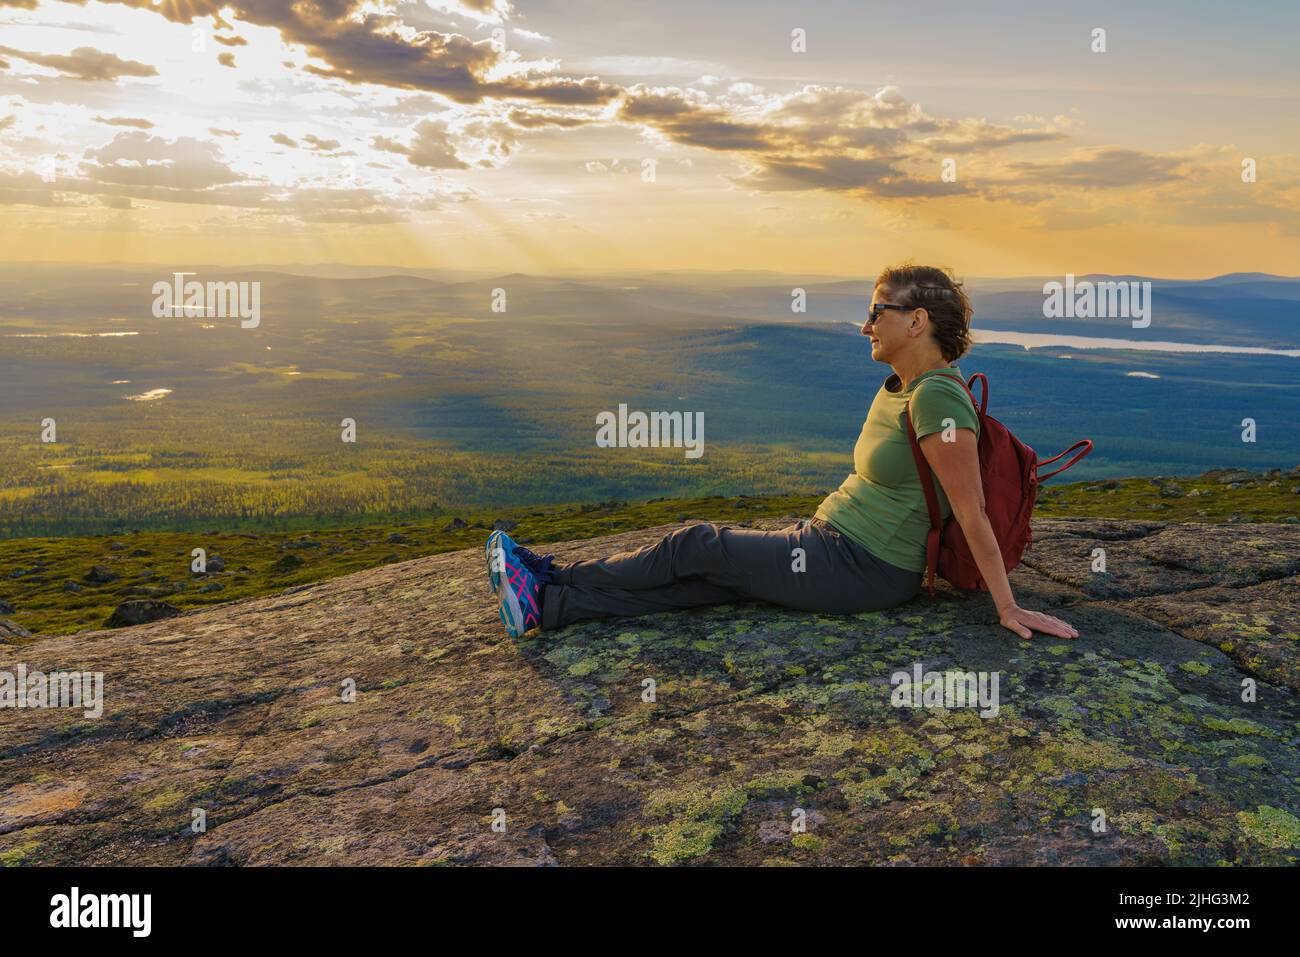 Woman sitting on mountain enjoying the view from Mount Dundret over Laponia, Gällivare county, Swedish Lapland, Sweden Stock Photo